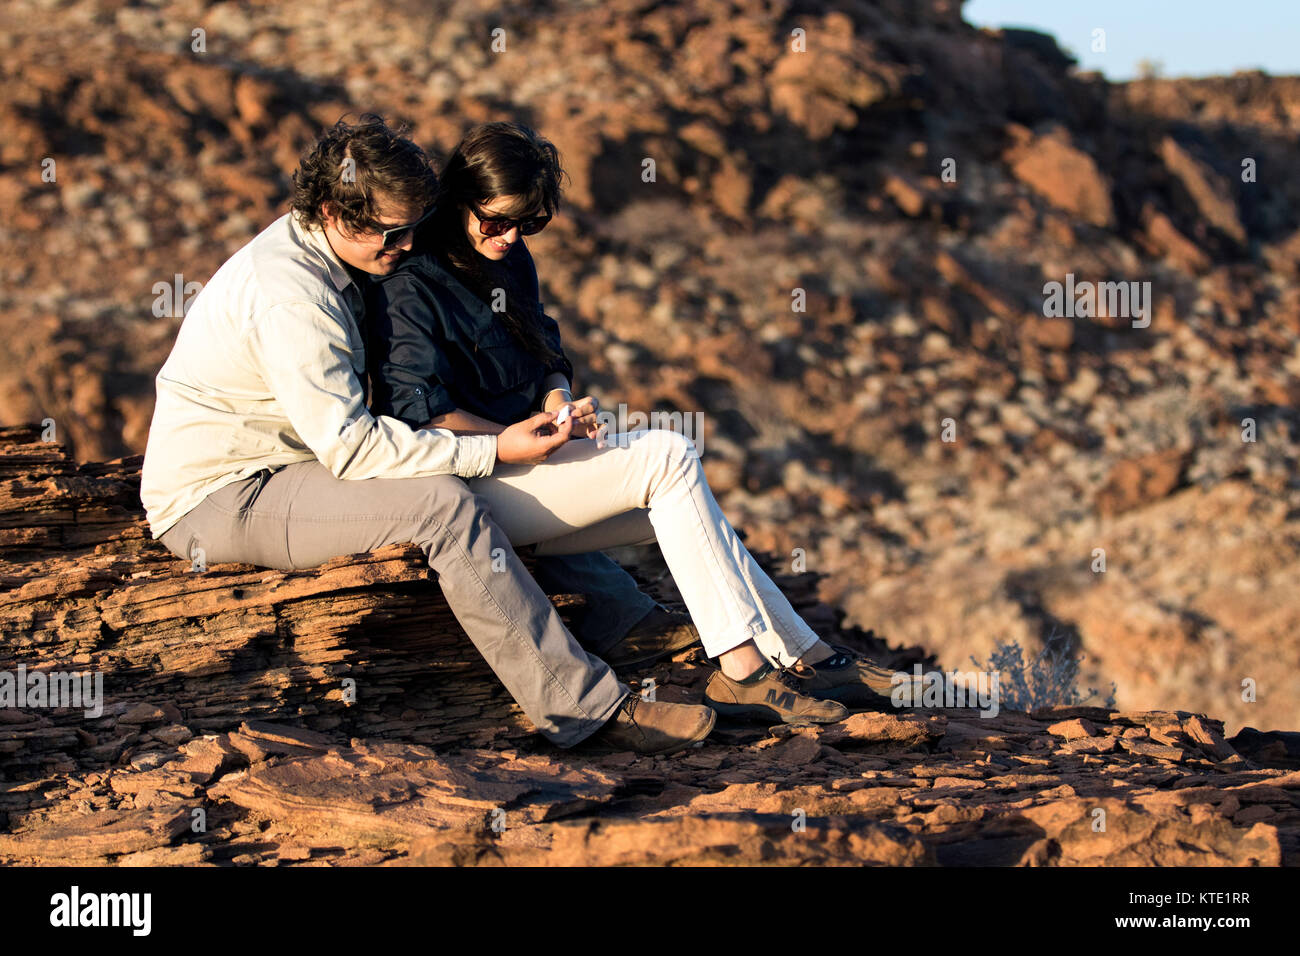 Young couple in  Damaraland sharing romantic moment - Huab Under Canvas, Damaraland, Namibia, Africa Stock Photo